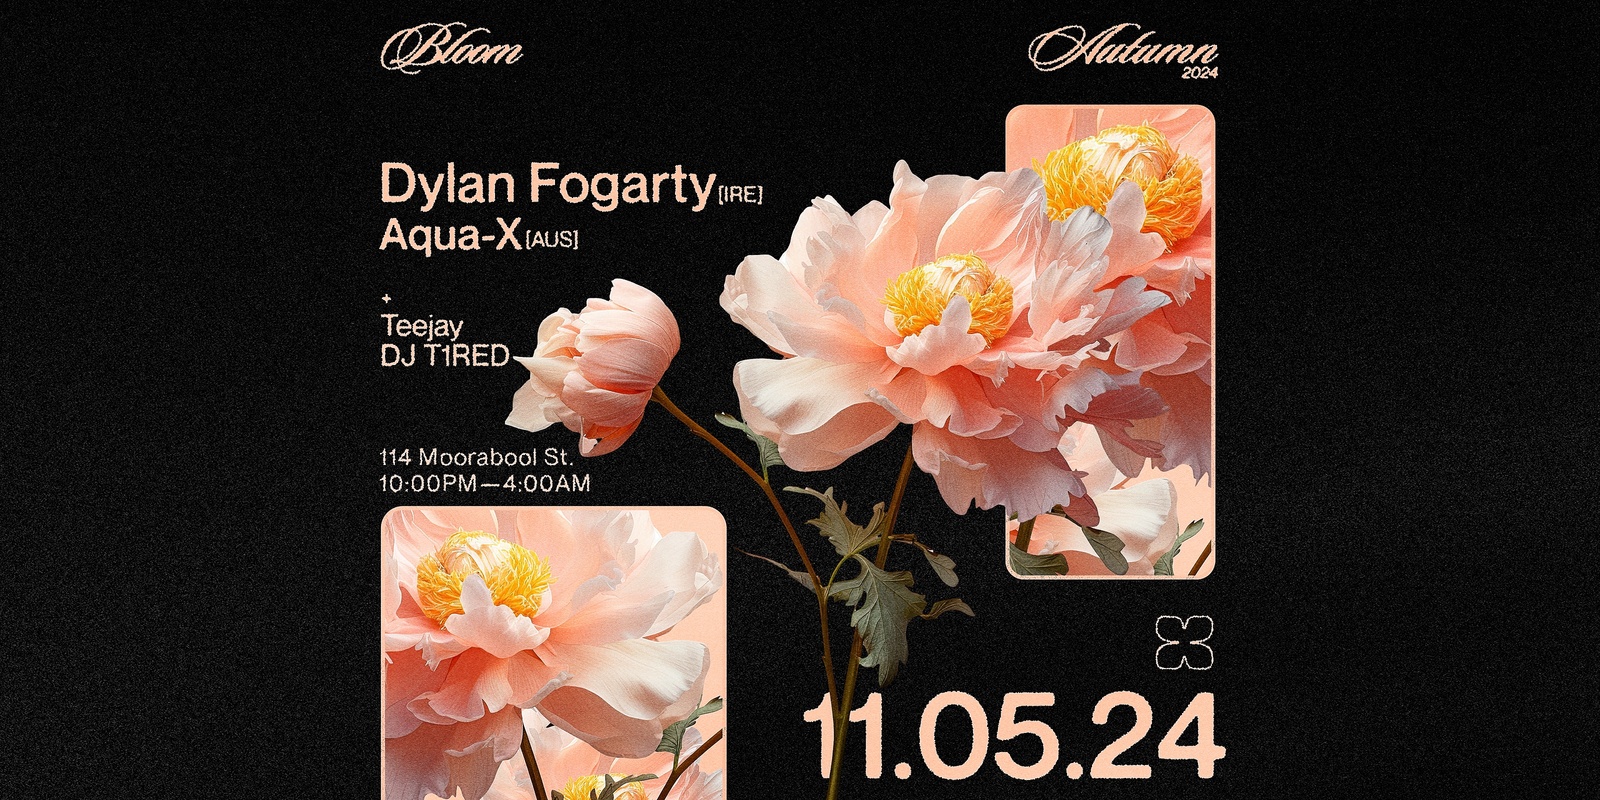 Banner image for Bloom ▬ Dylan Fogarty [IRE] & Aqua-X [AUS]